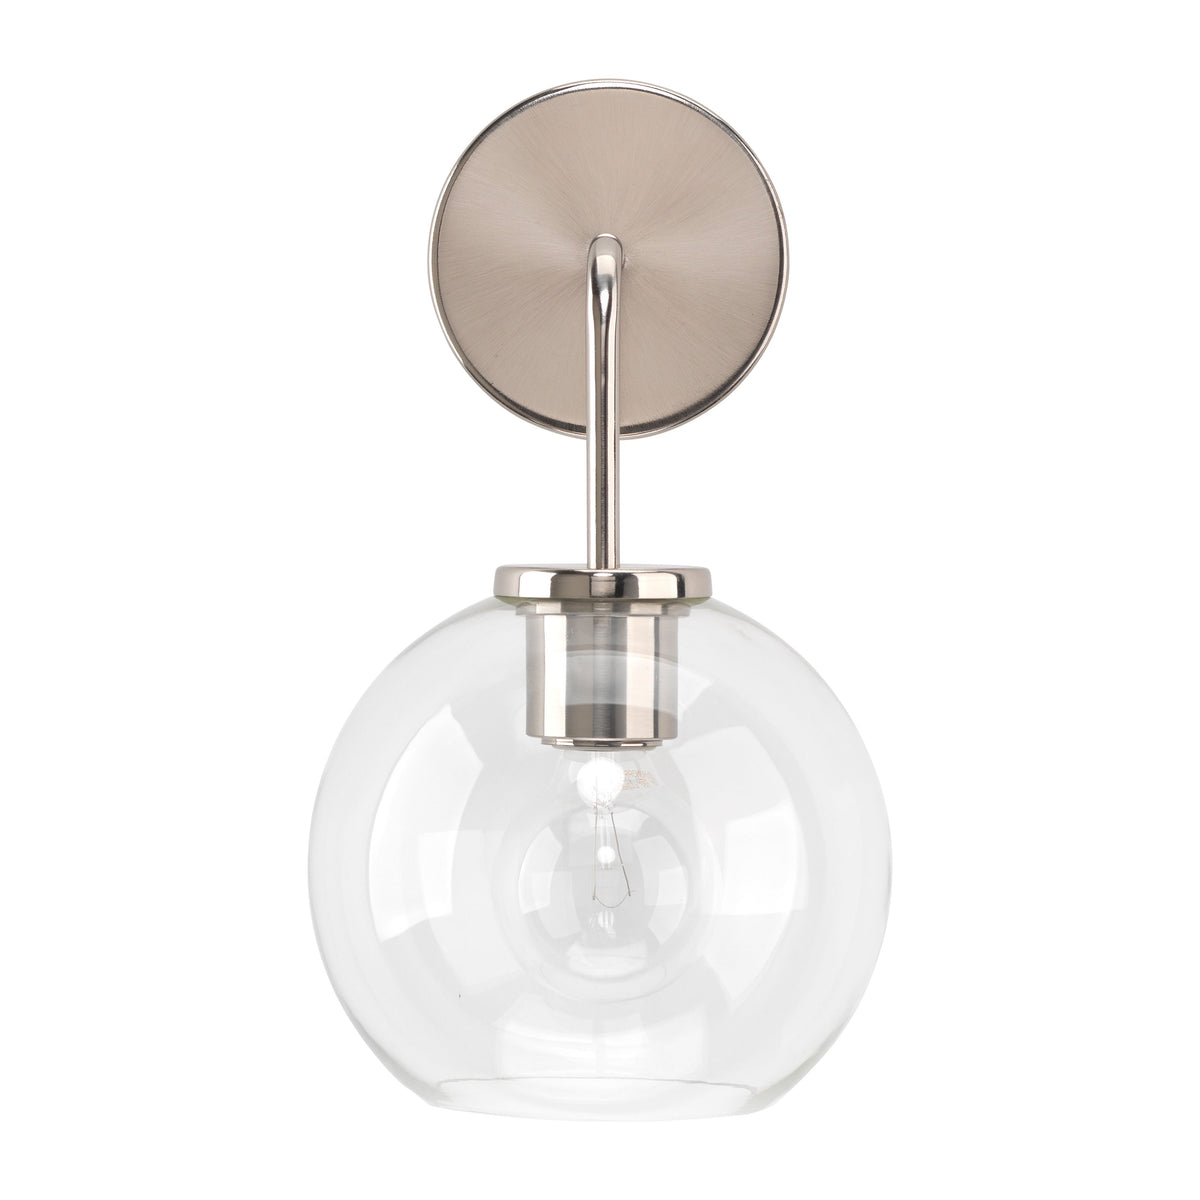 Jamie Young Company - LS4REECESL - Reece Wall Sconce - Reece - Silver, Clear Glass